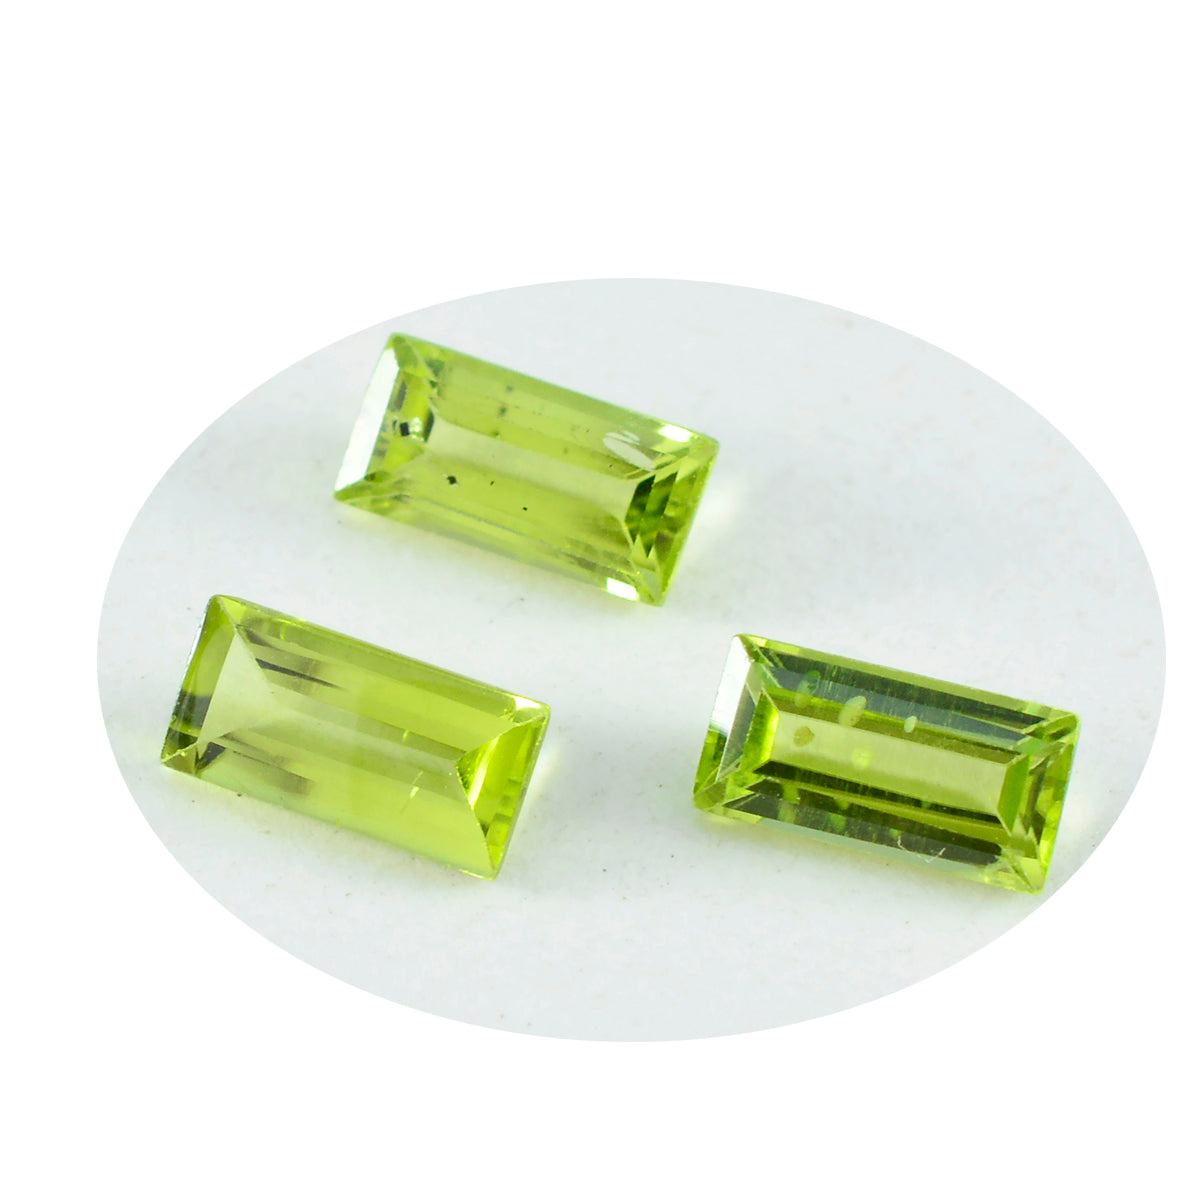 Riyogems 1PC Genuine Green Peridot Faceted 6x12 mm  Baguette Shape attractive Quality Gems